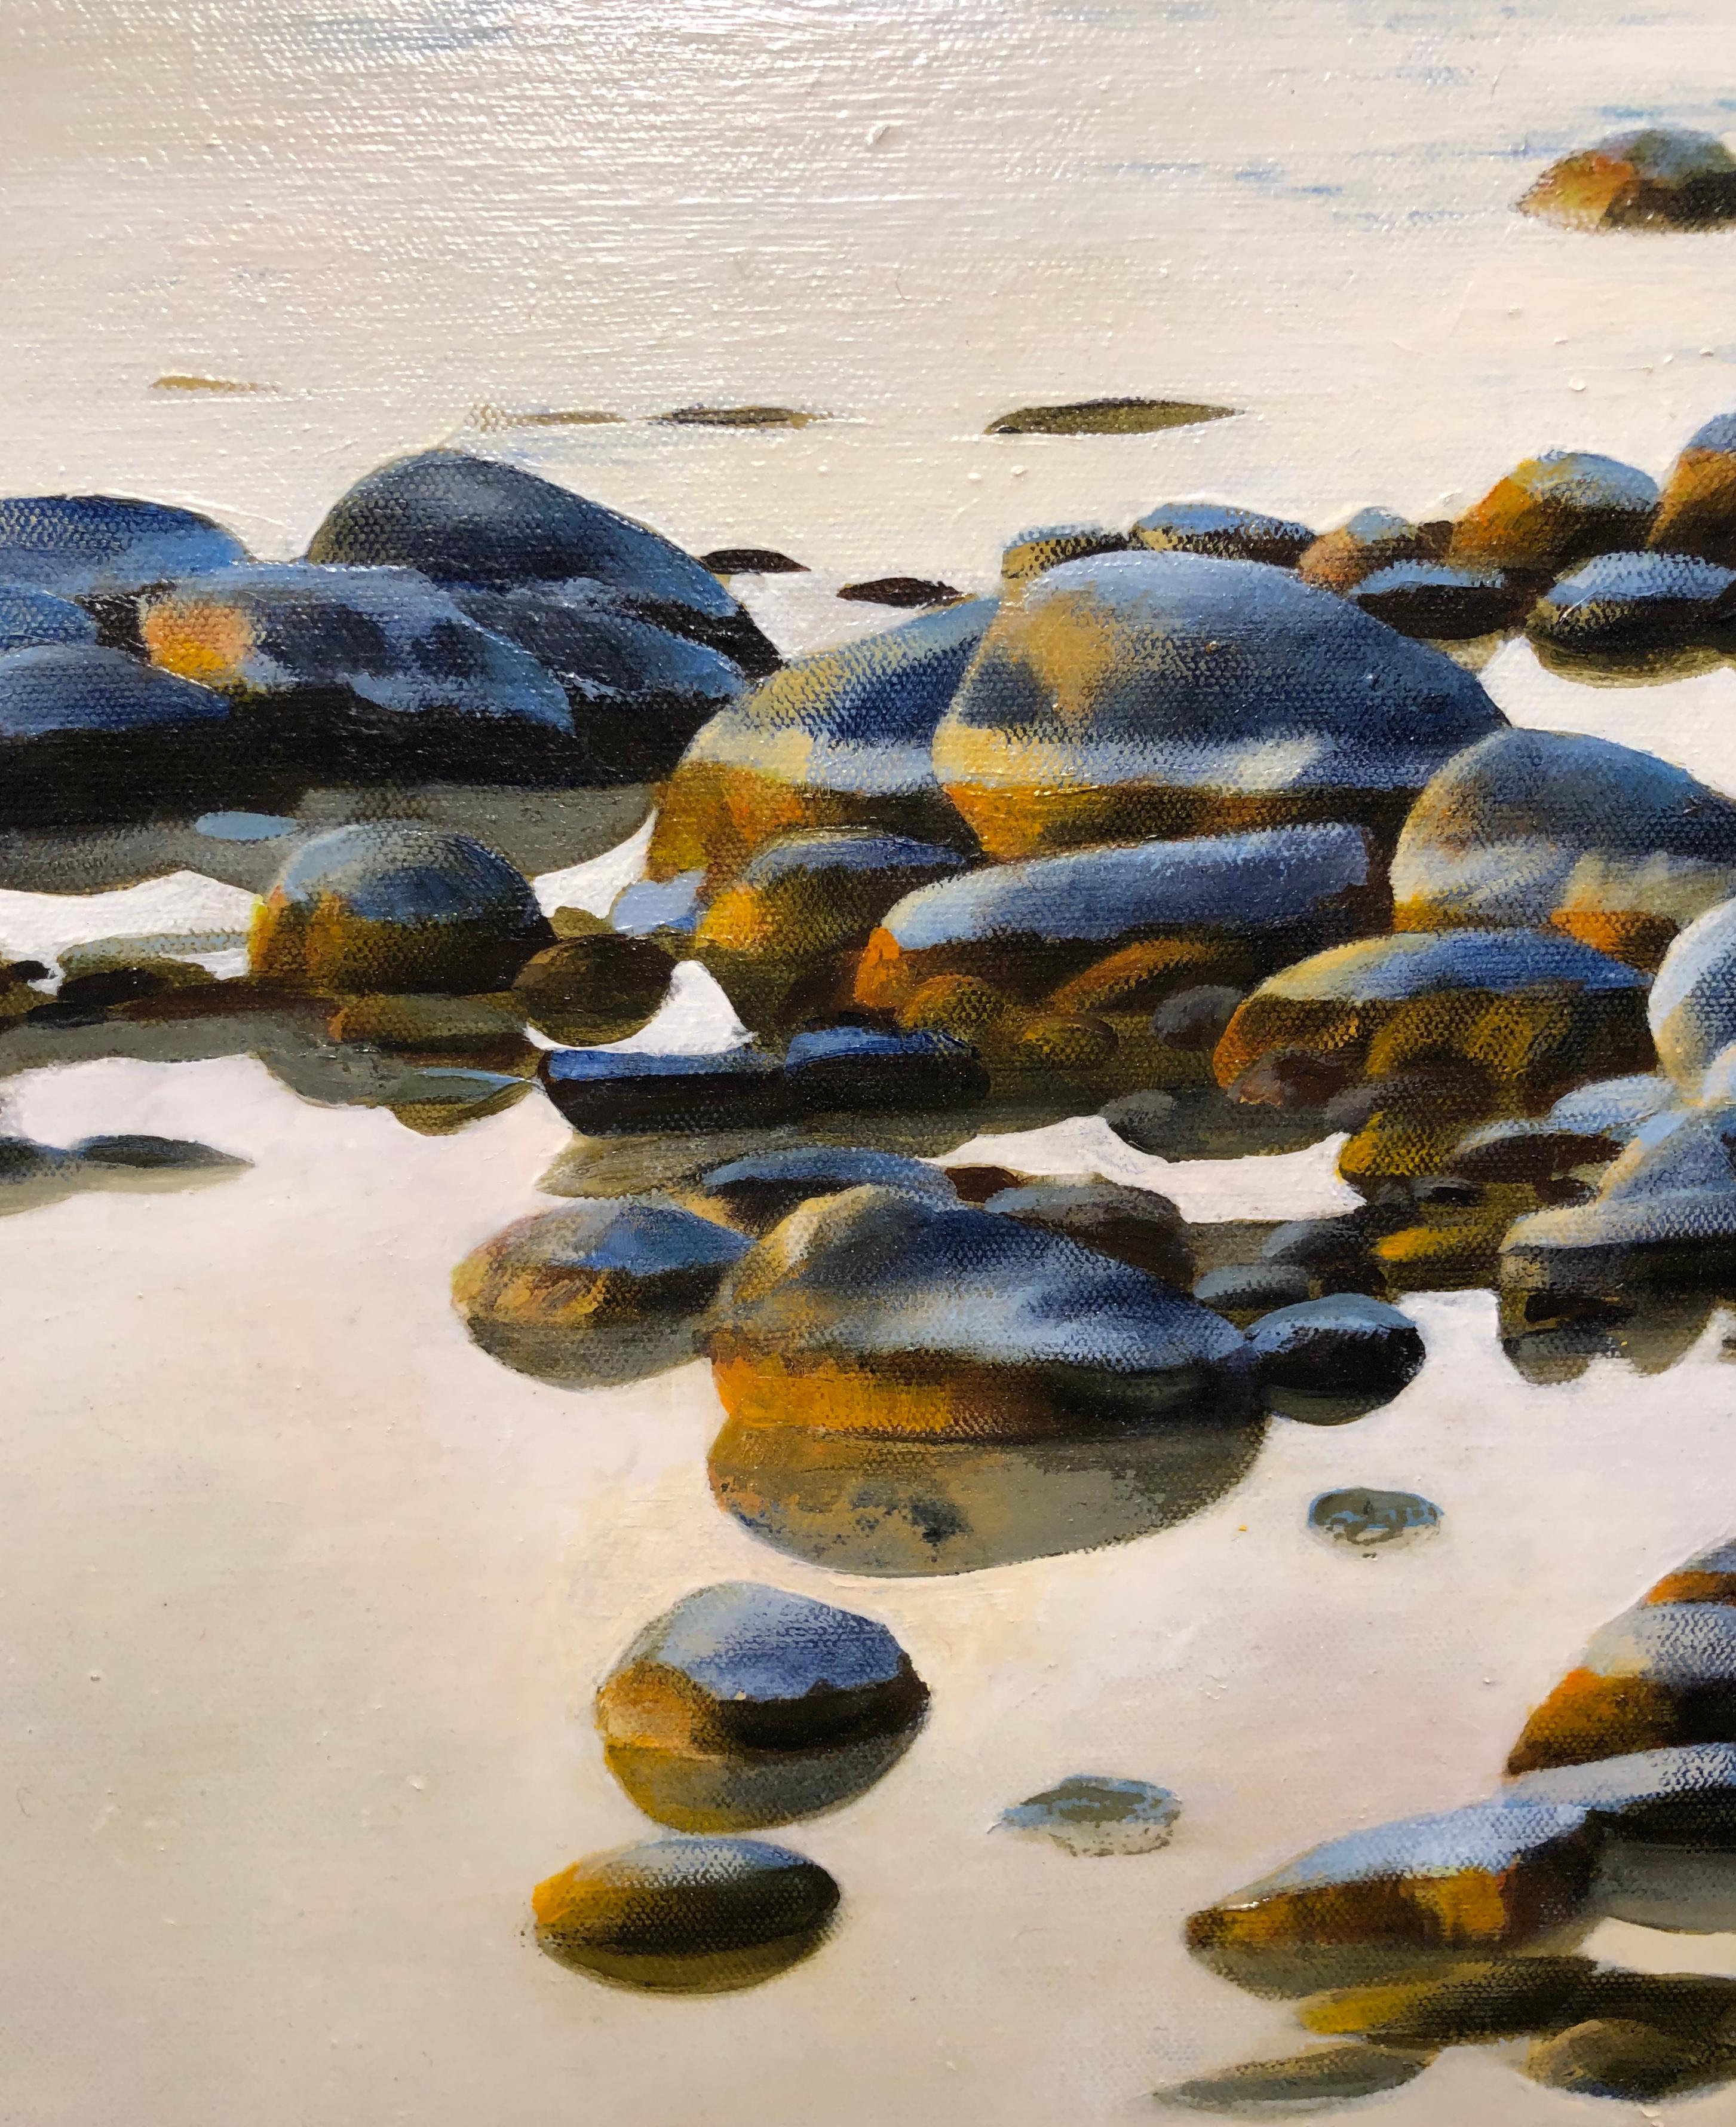 Song of Stones, Rocky Beach of Northern Michigan, Original Oil on Canvas - Gray Landscape Painting by Deborah Ebbers